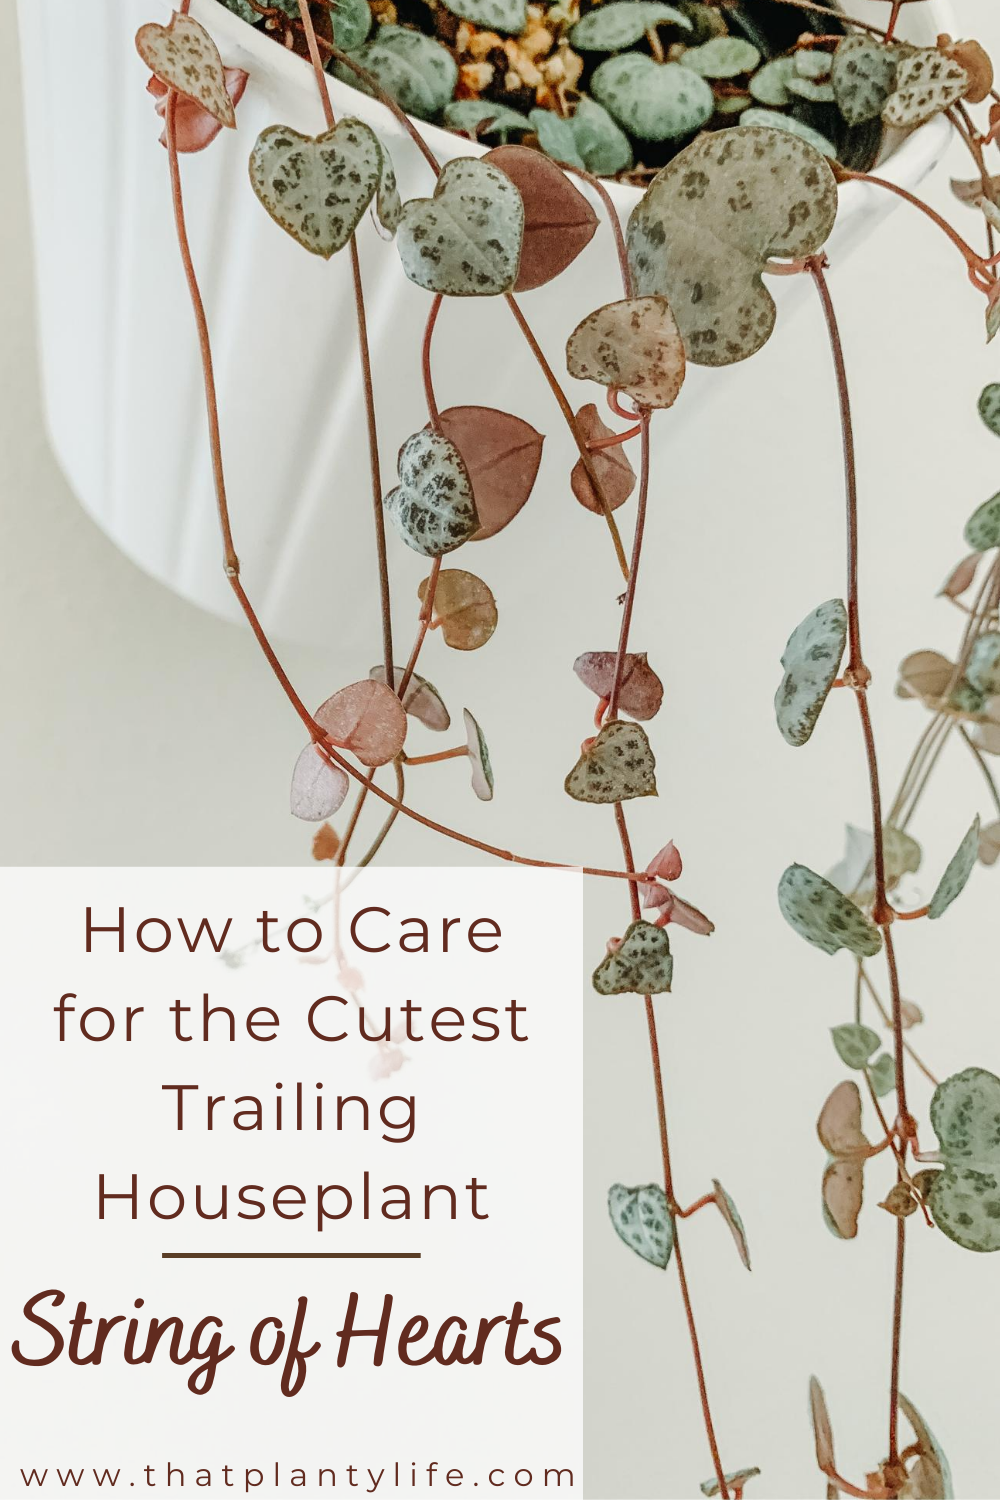 String of Hearts Care Guide | Cutest Trailing Houseplant | www.thatplantylife.com